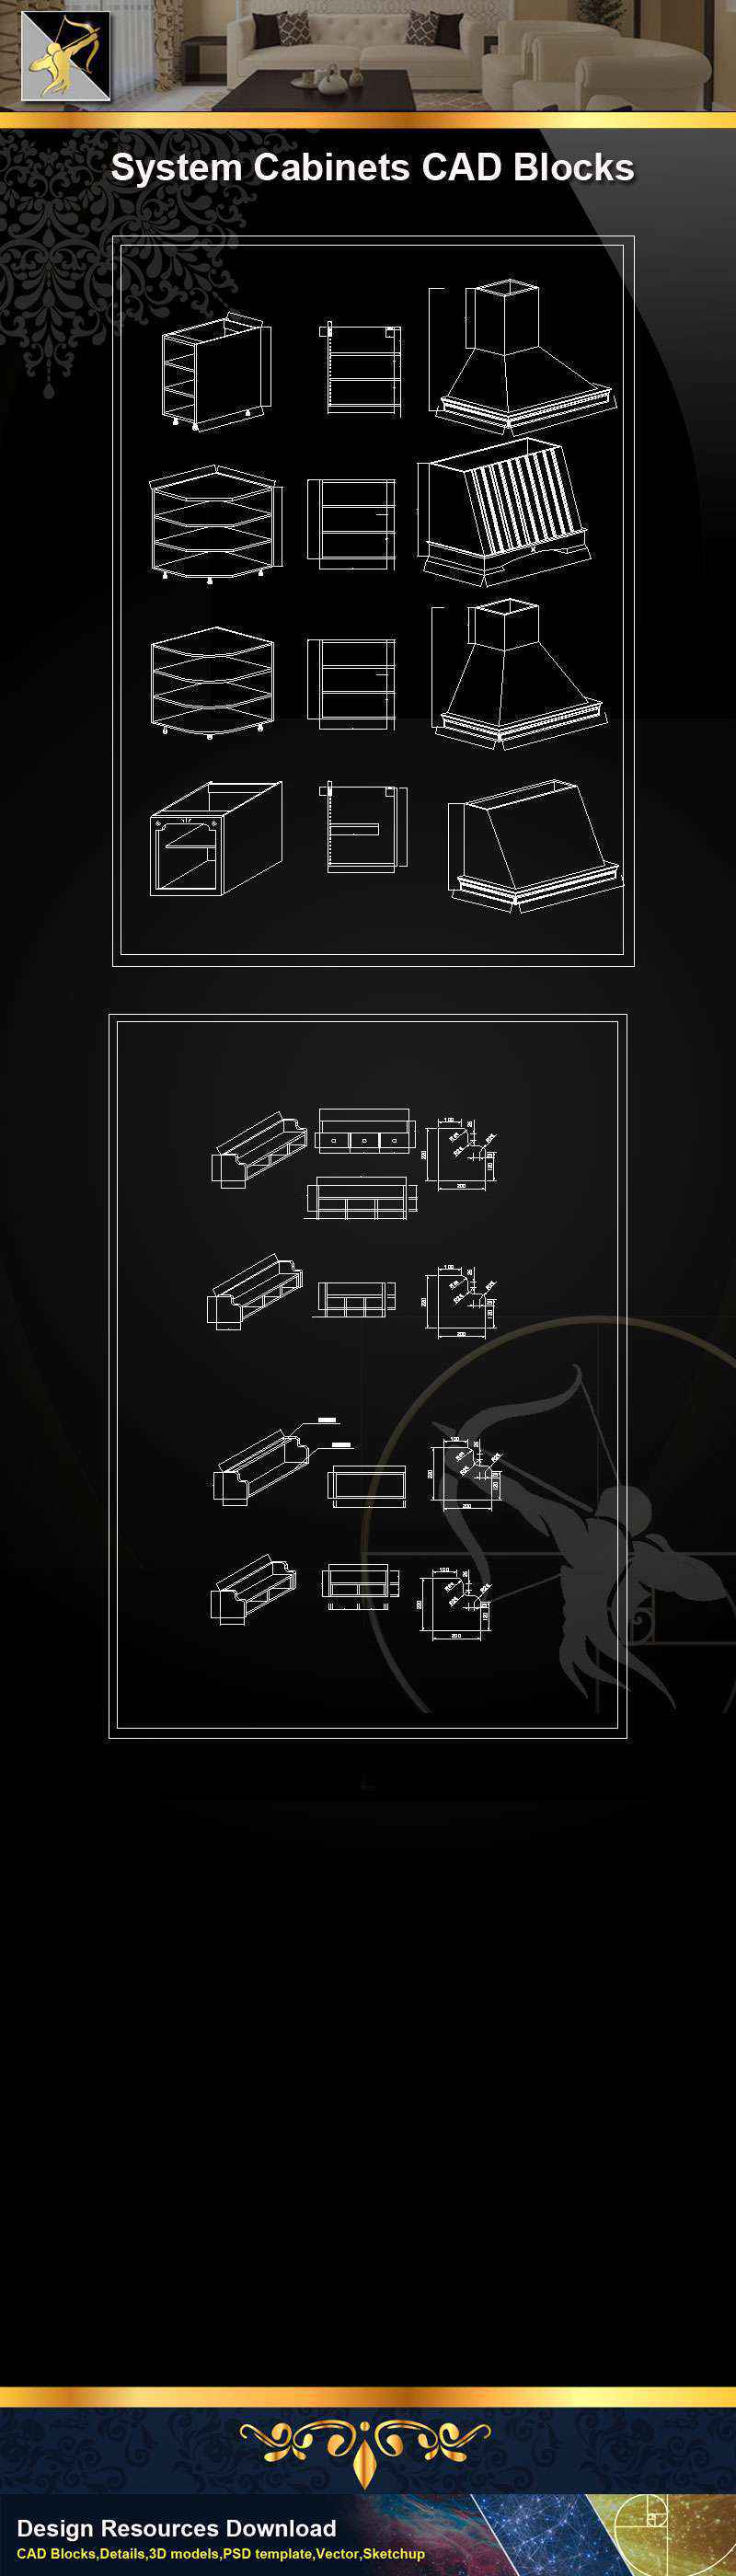 ★【 System Cabinets CAD Drawings V.3】@Autocad Blocks,Drawings,CAD Details,Elevation